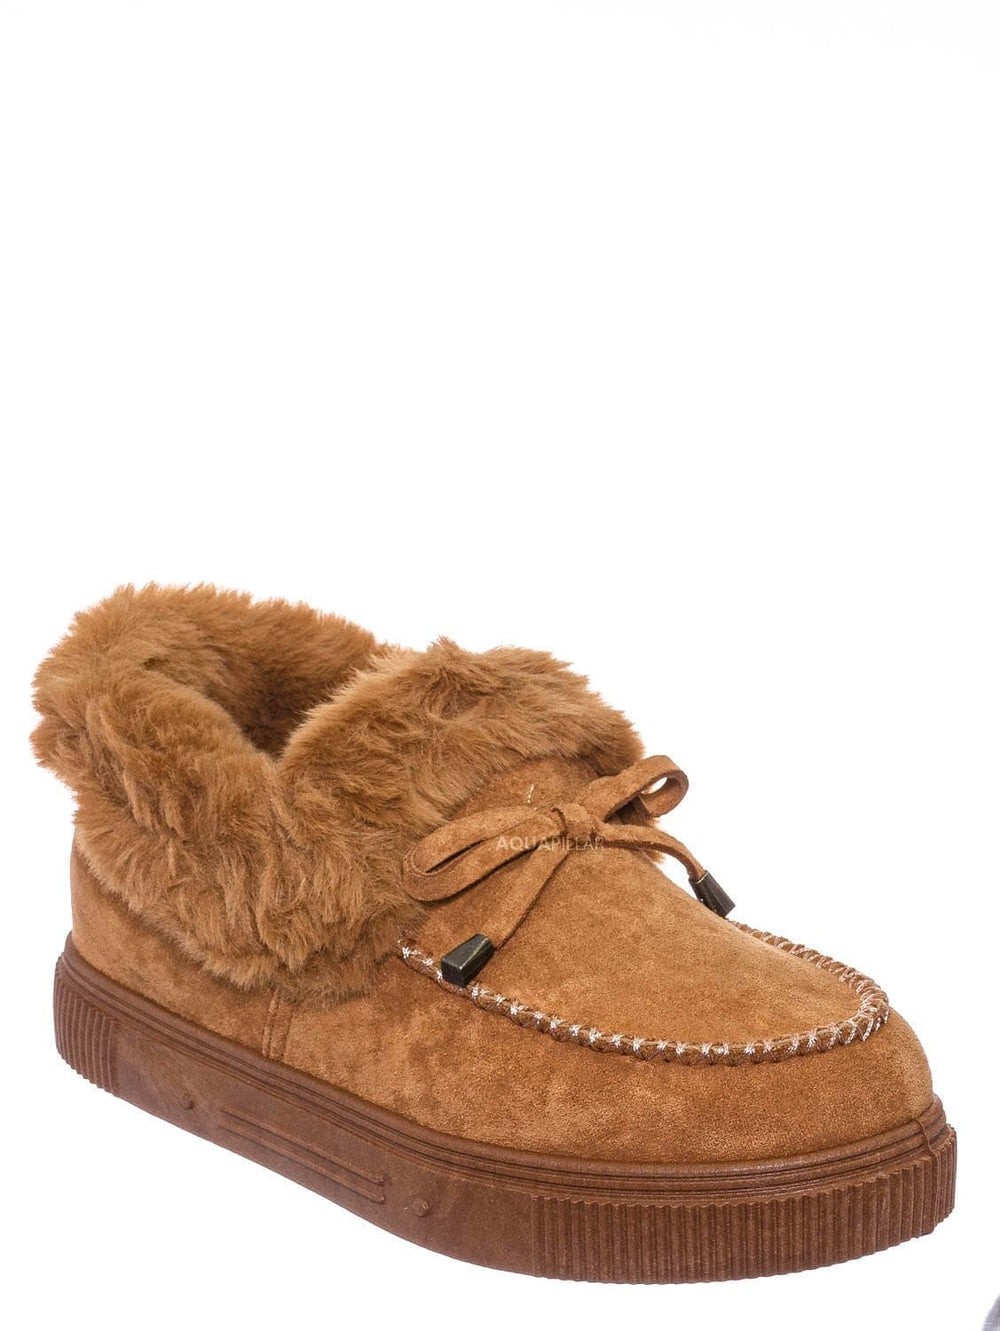 moccasin slipper shoes